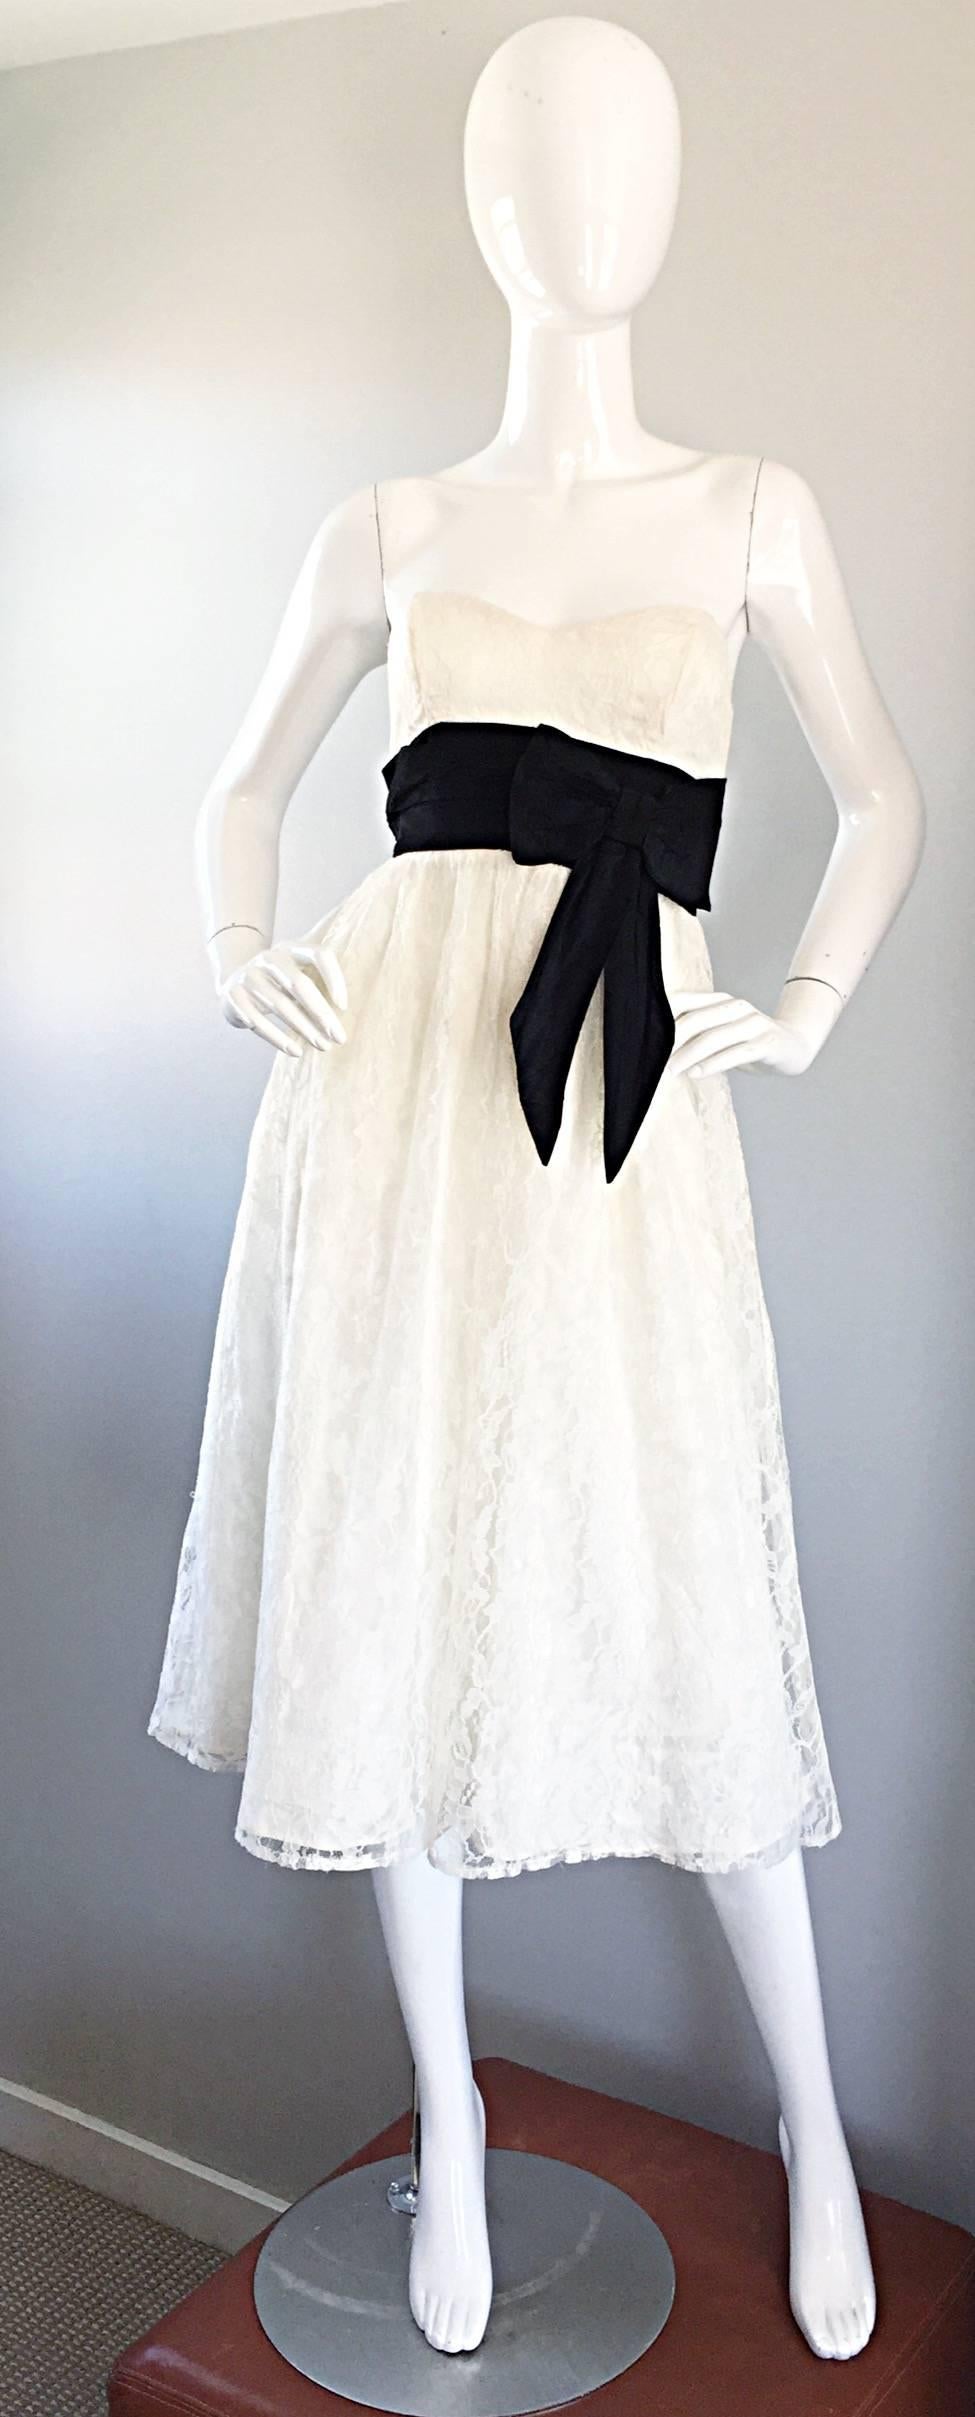 Chic vintage 90s does 50s white and black lace strapless dress! Features white French lace over a silk white underlay. Attached black taffeta origami layered belt. Full hidden zipper up the back. Strapless sweetheart neckline. Interior boning on the